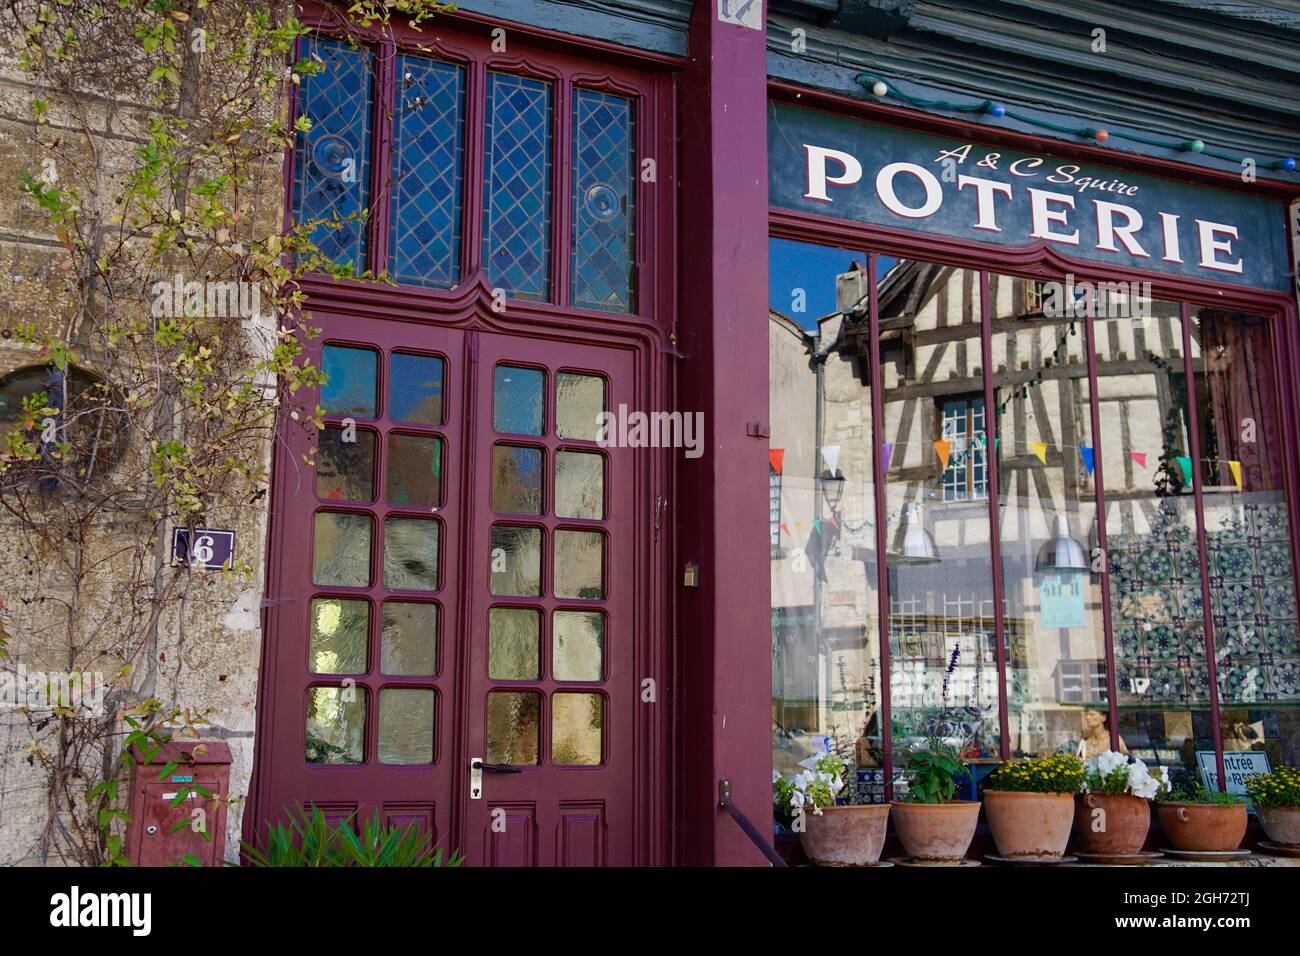 Potters shop in Noyers sur Serein, France Stock Photo